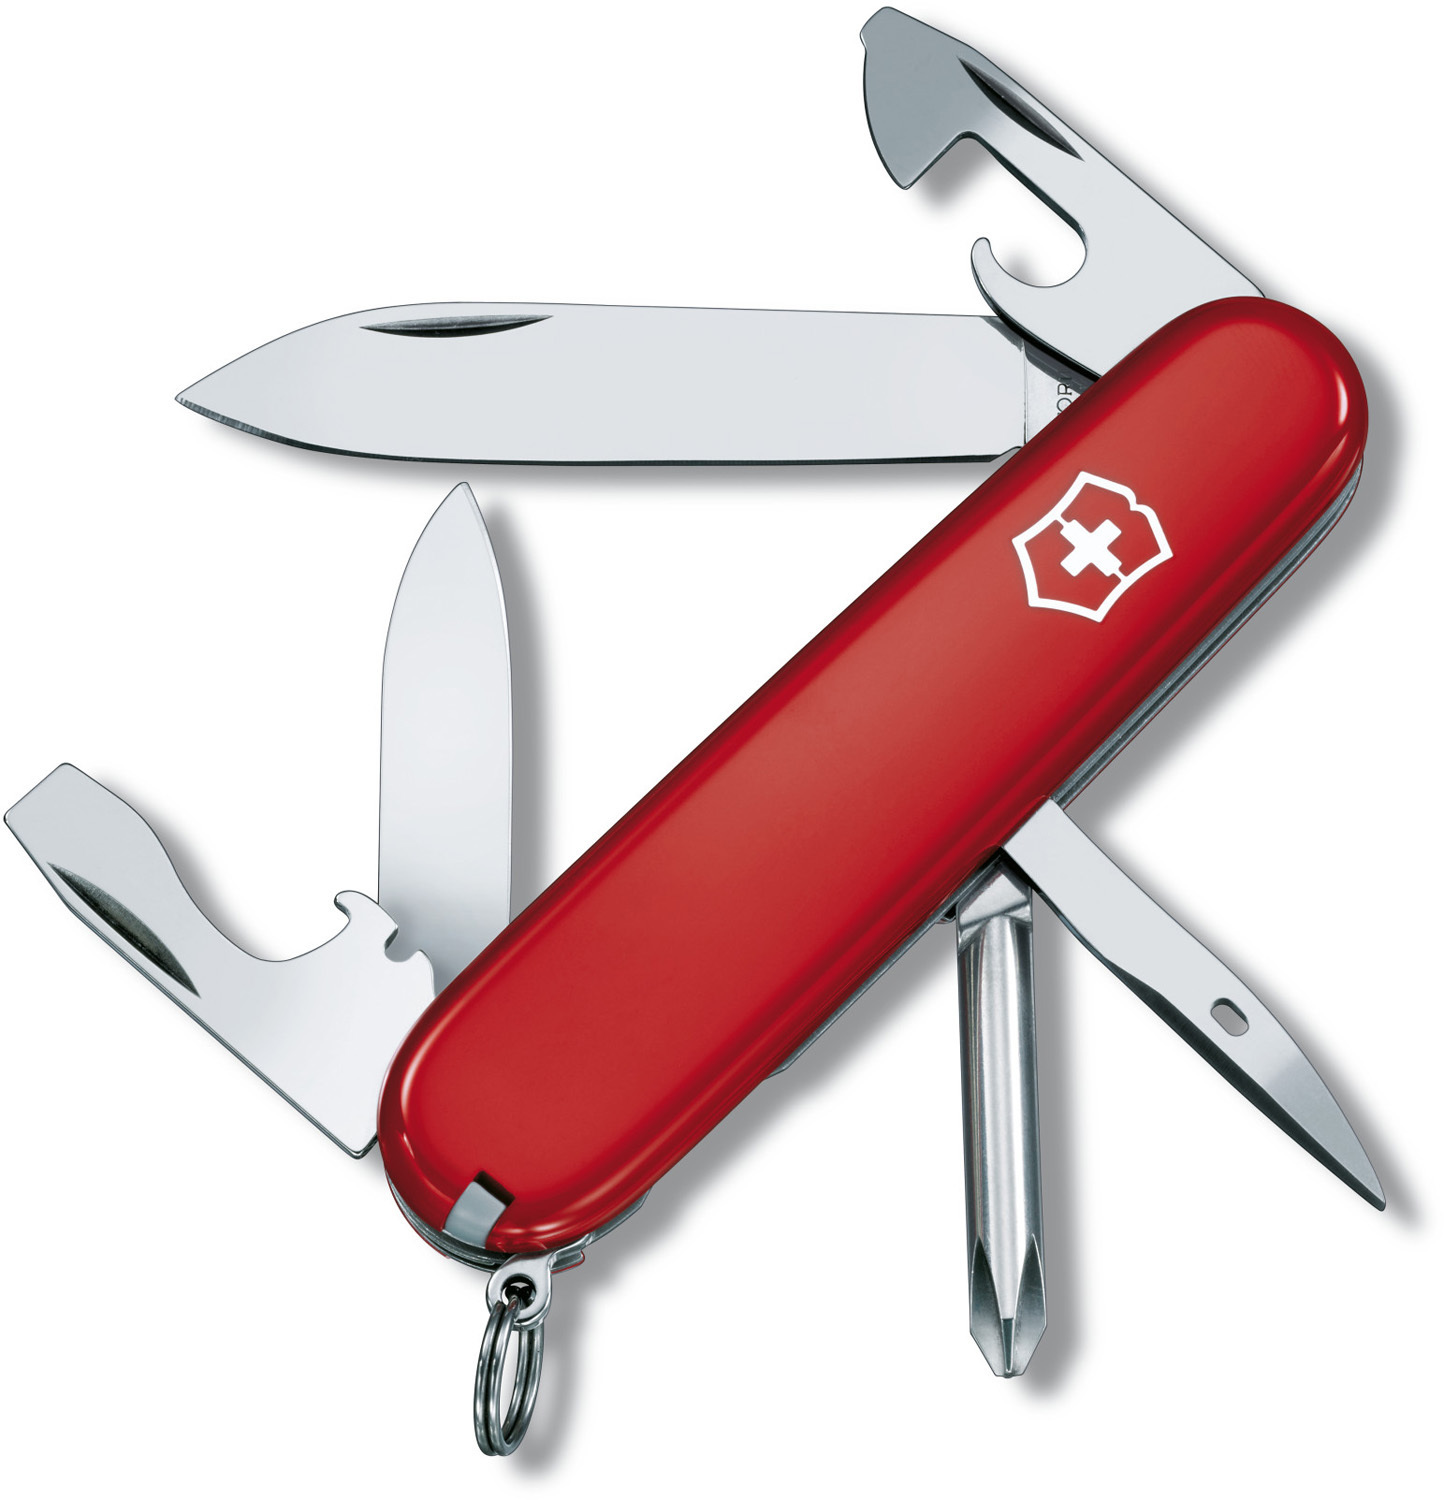 Victorinox Swiss Army Tinker 12 Function Red Pocket Knife 1.4603 - image 1 of 2